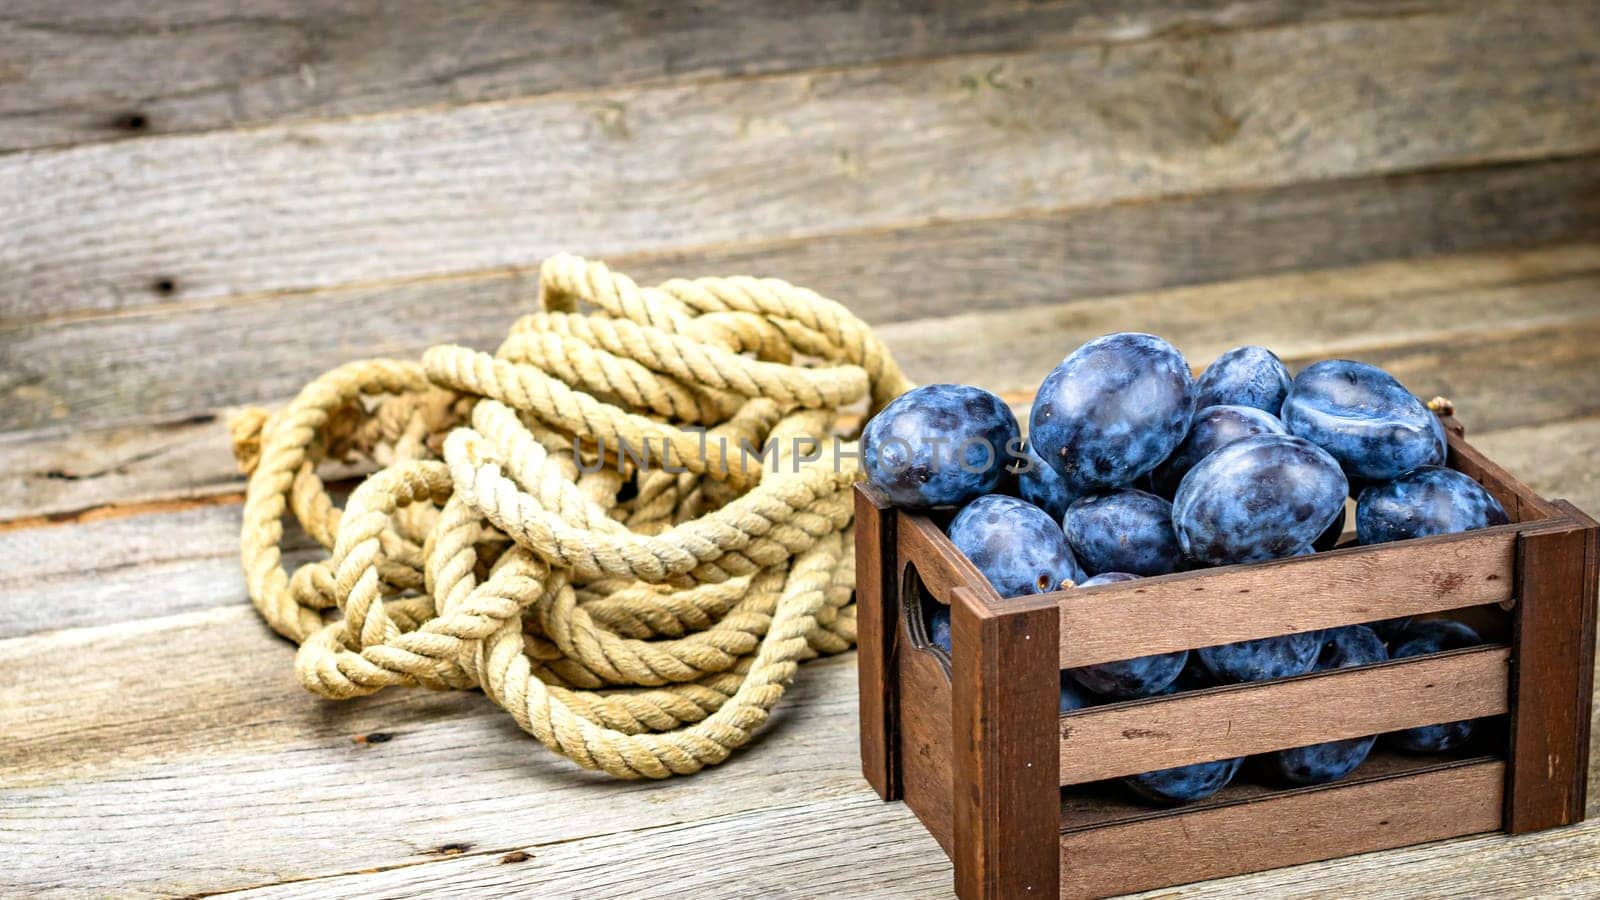 Ripe blue plums in a wooden crate in a rustic composition.